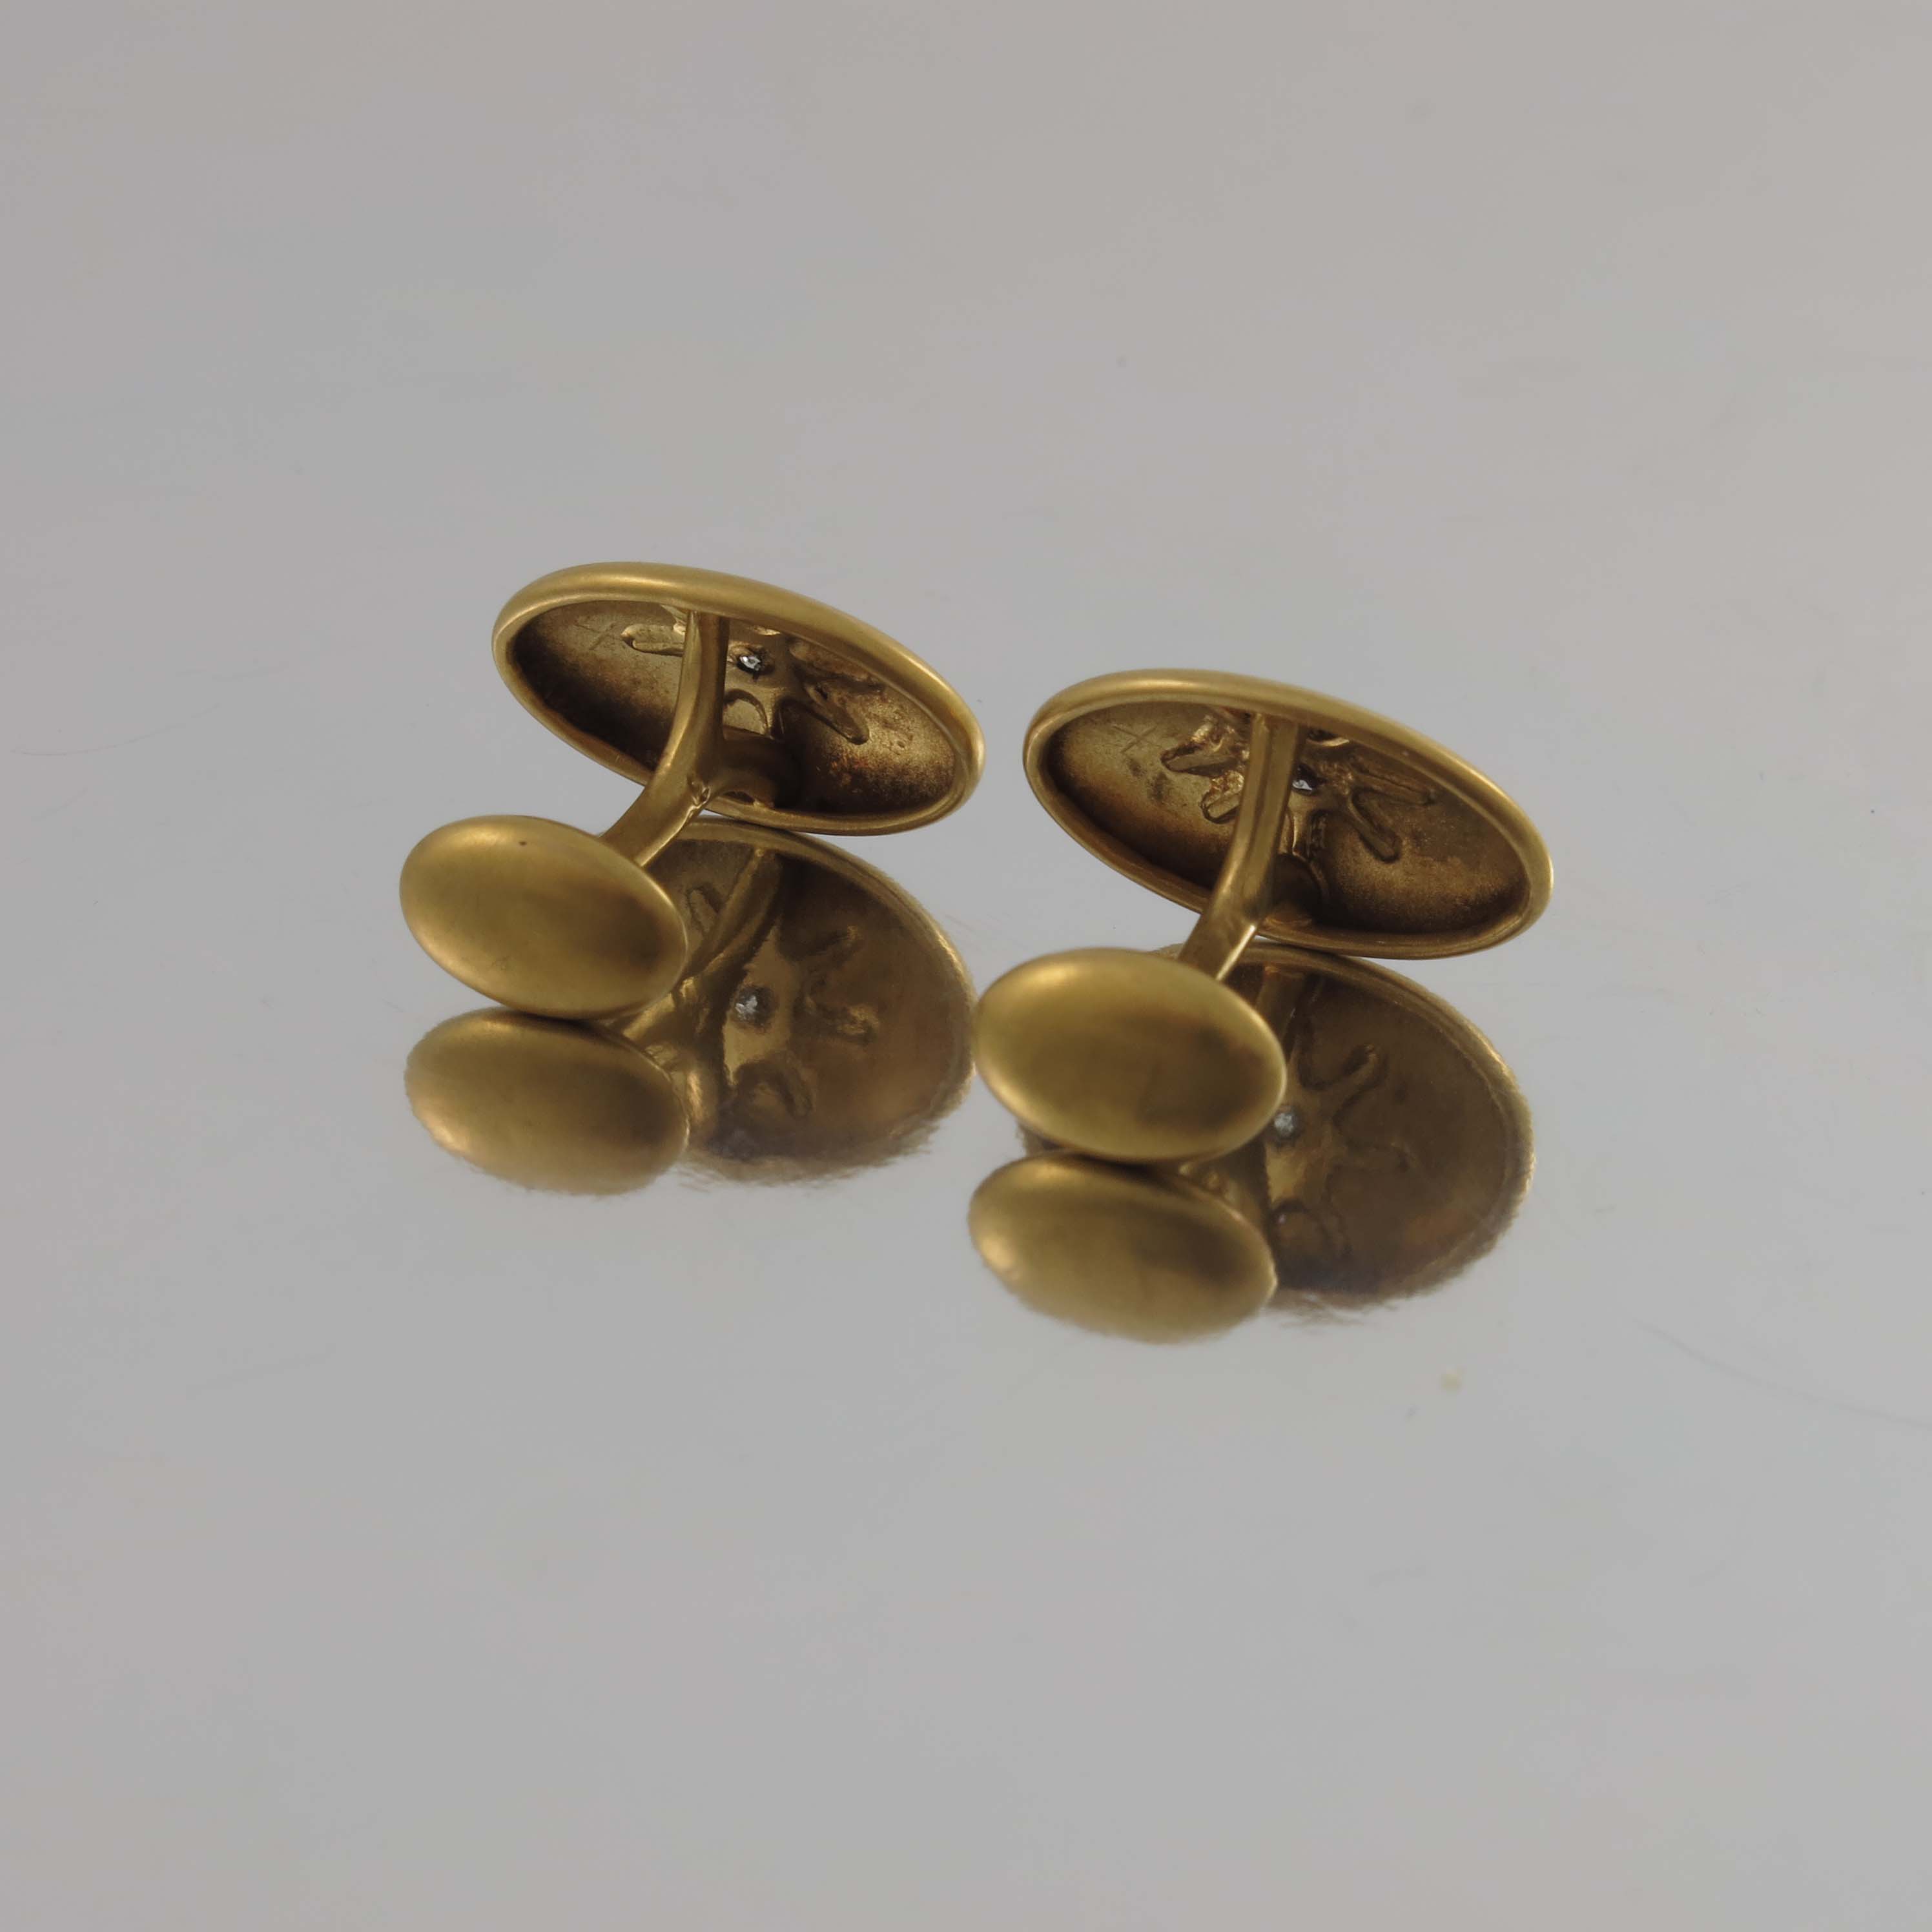 A pair of 18 carat gold and diamond cufflinks - Image 2 of 2